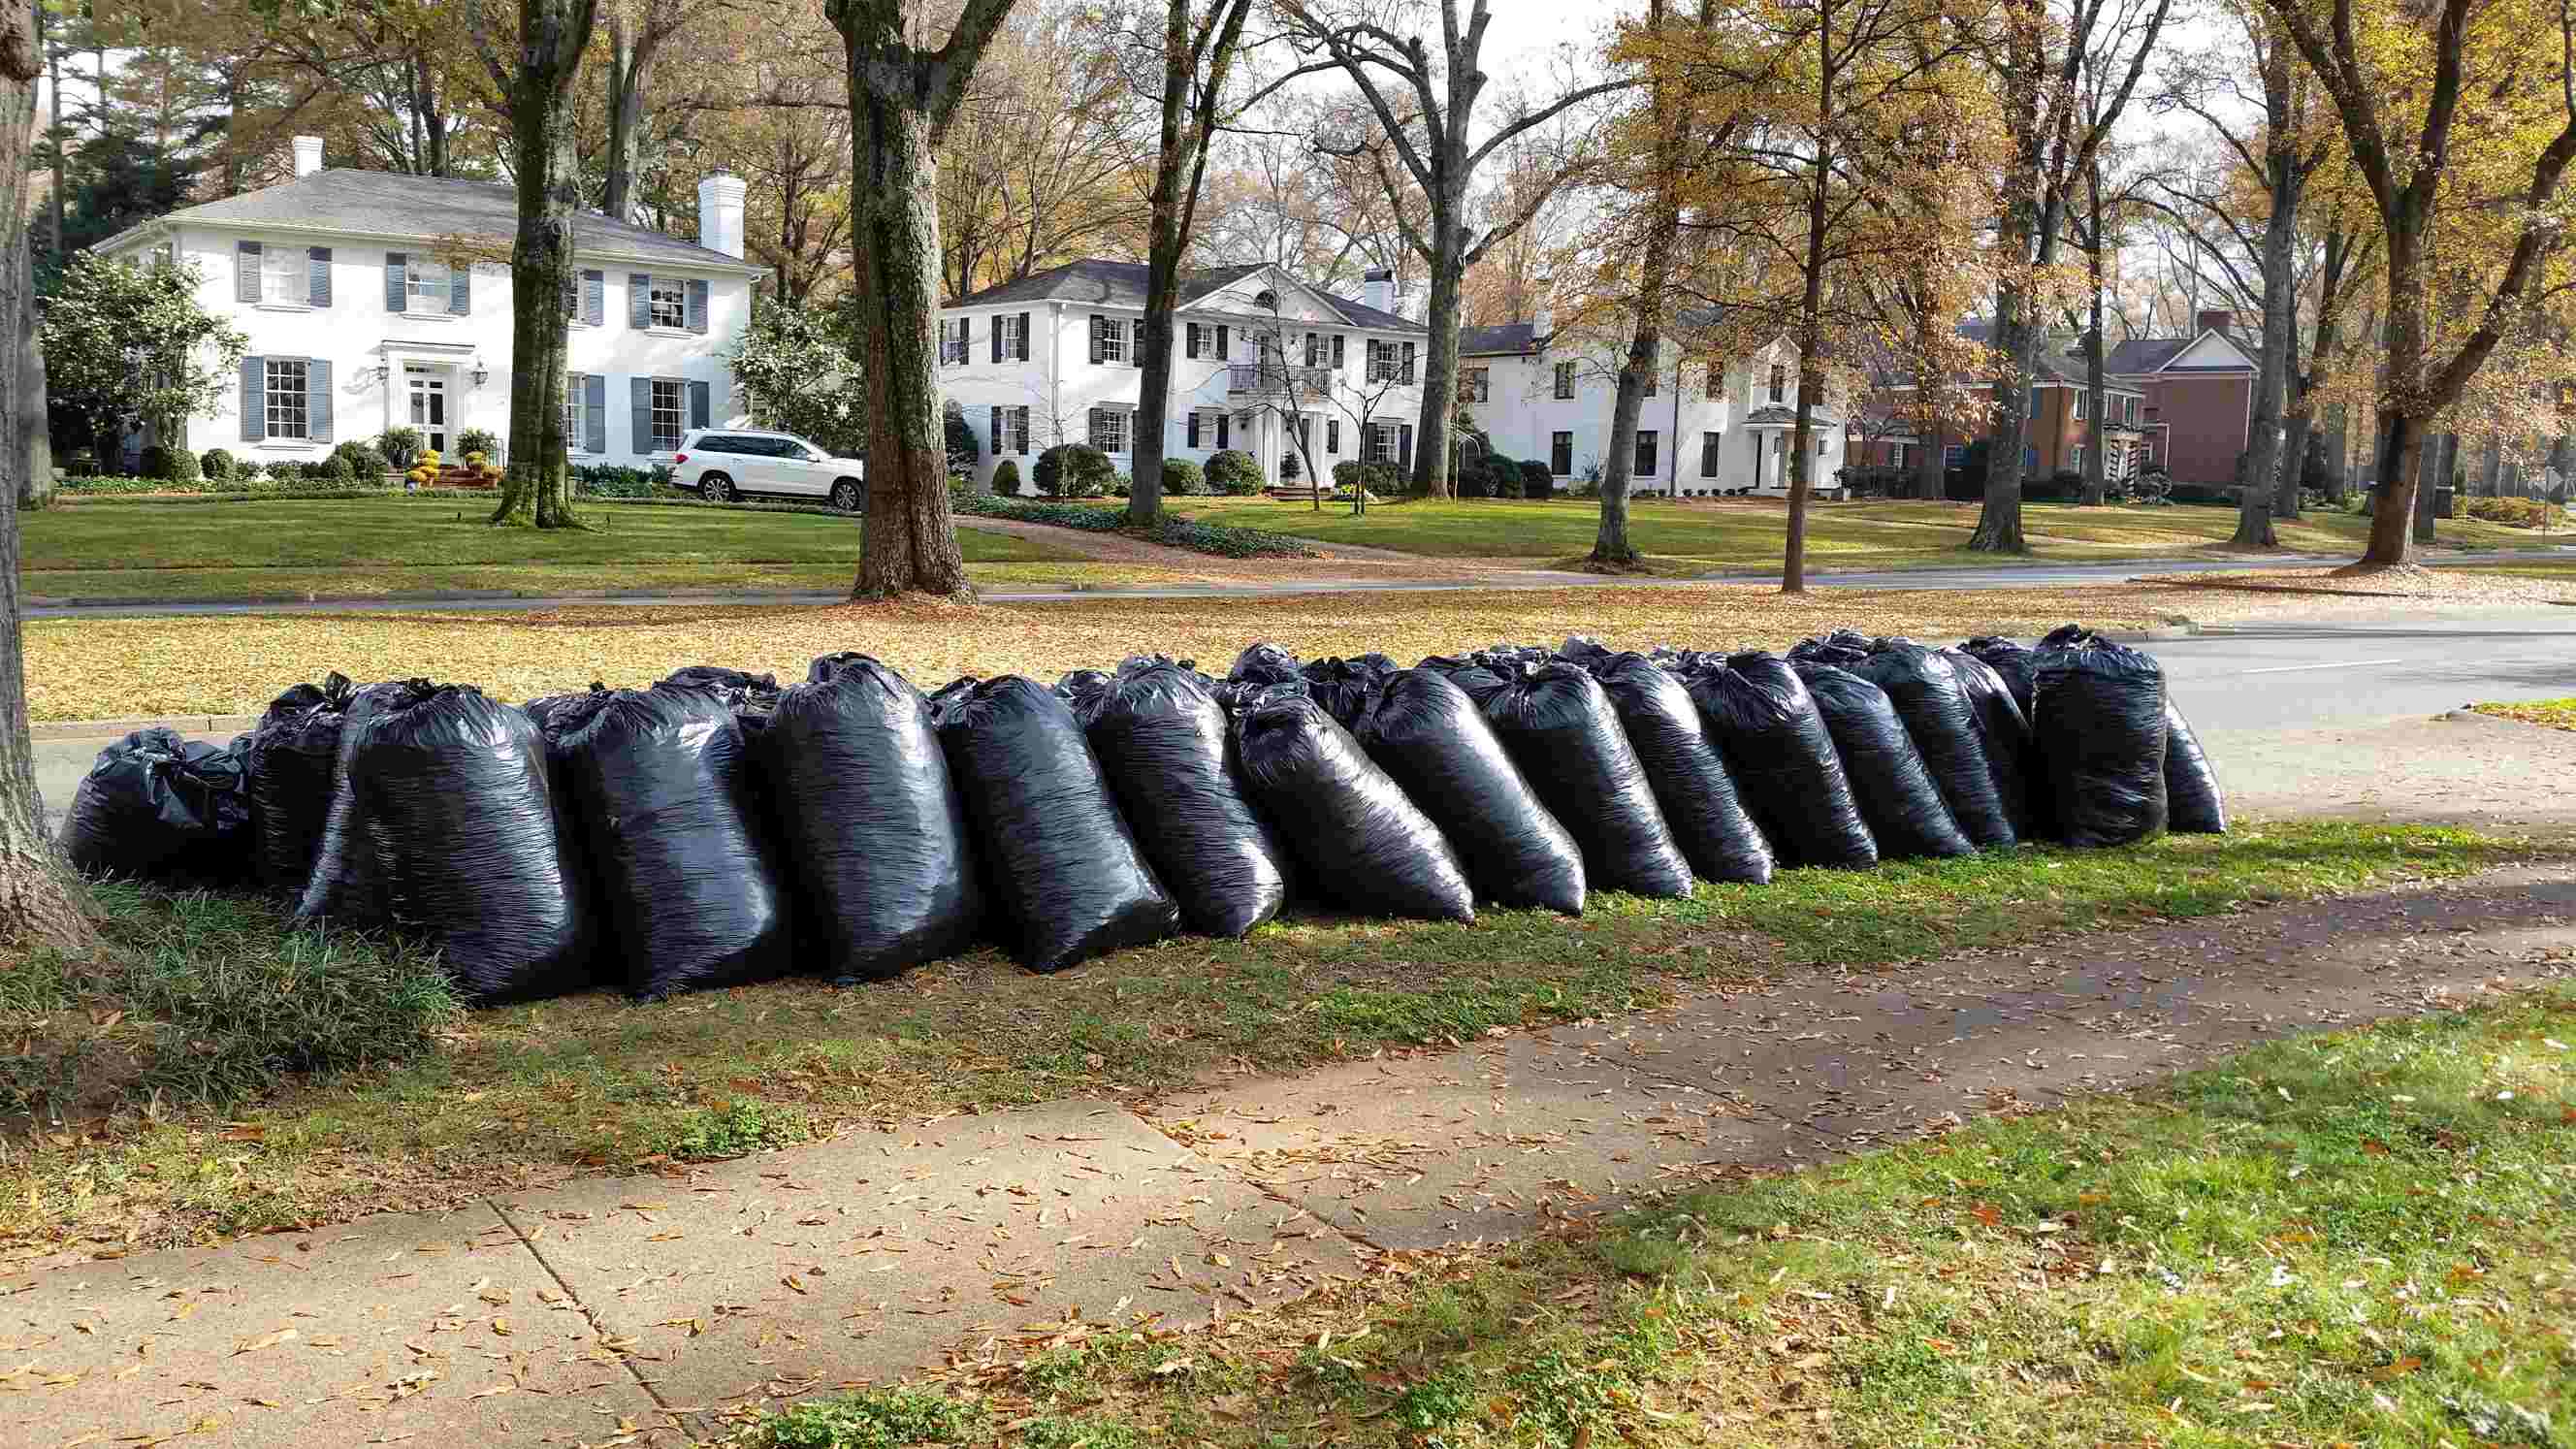 63 wio reduced leaf bags on Queens Road West Dec 5,17